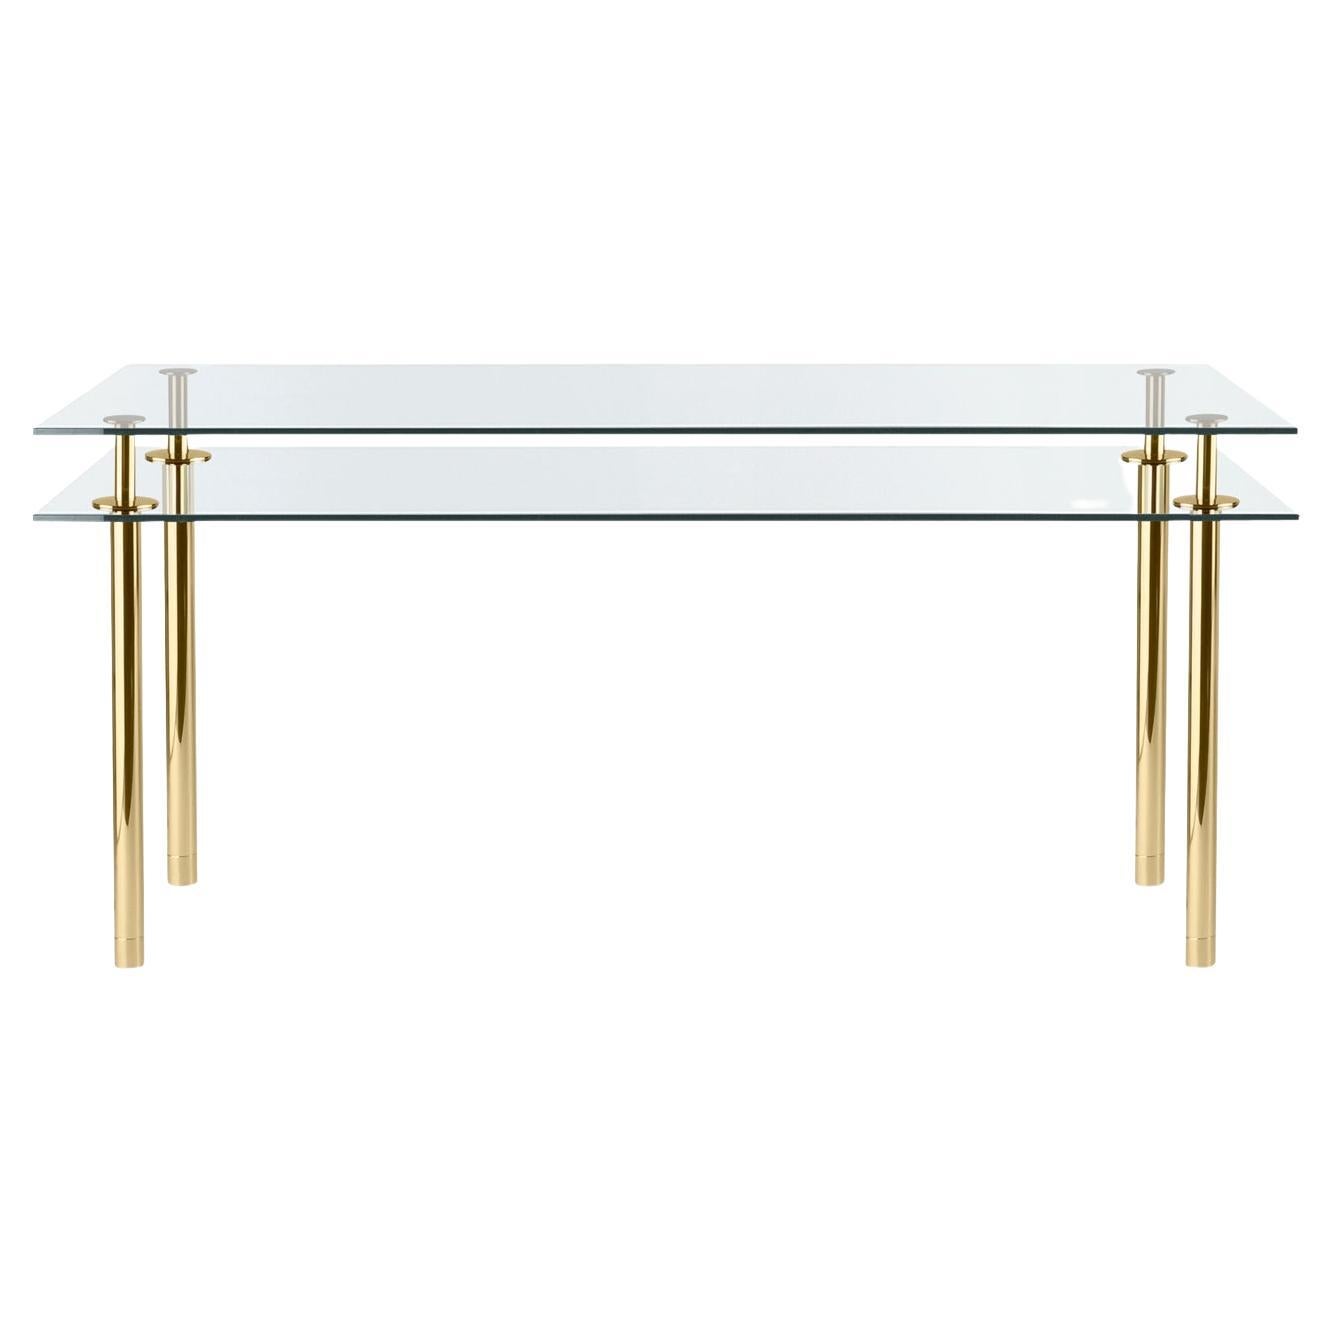 Legs Medium Rectangular Table in Crystal and Polished Brass By Paolo Rizzato For Sale